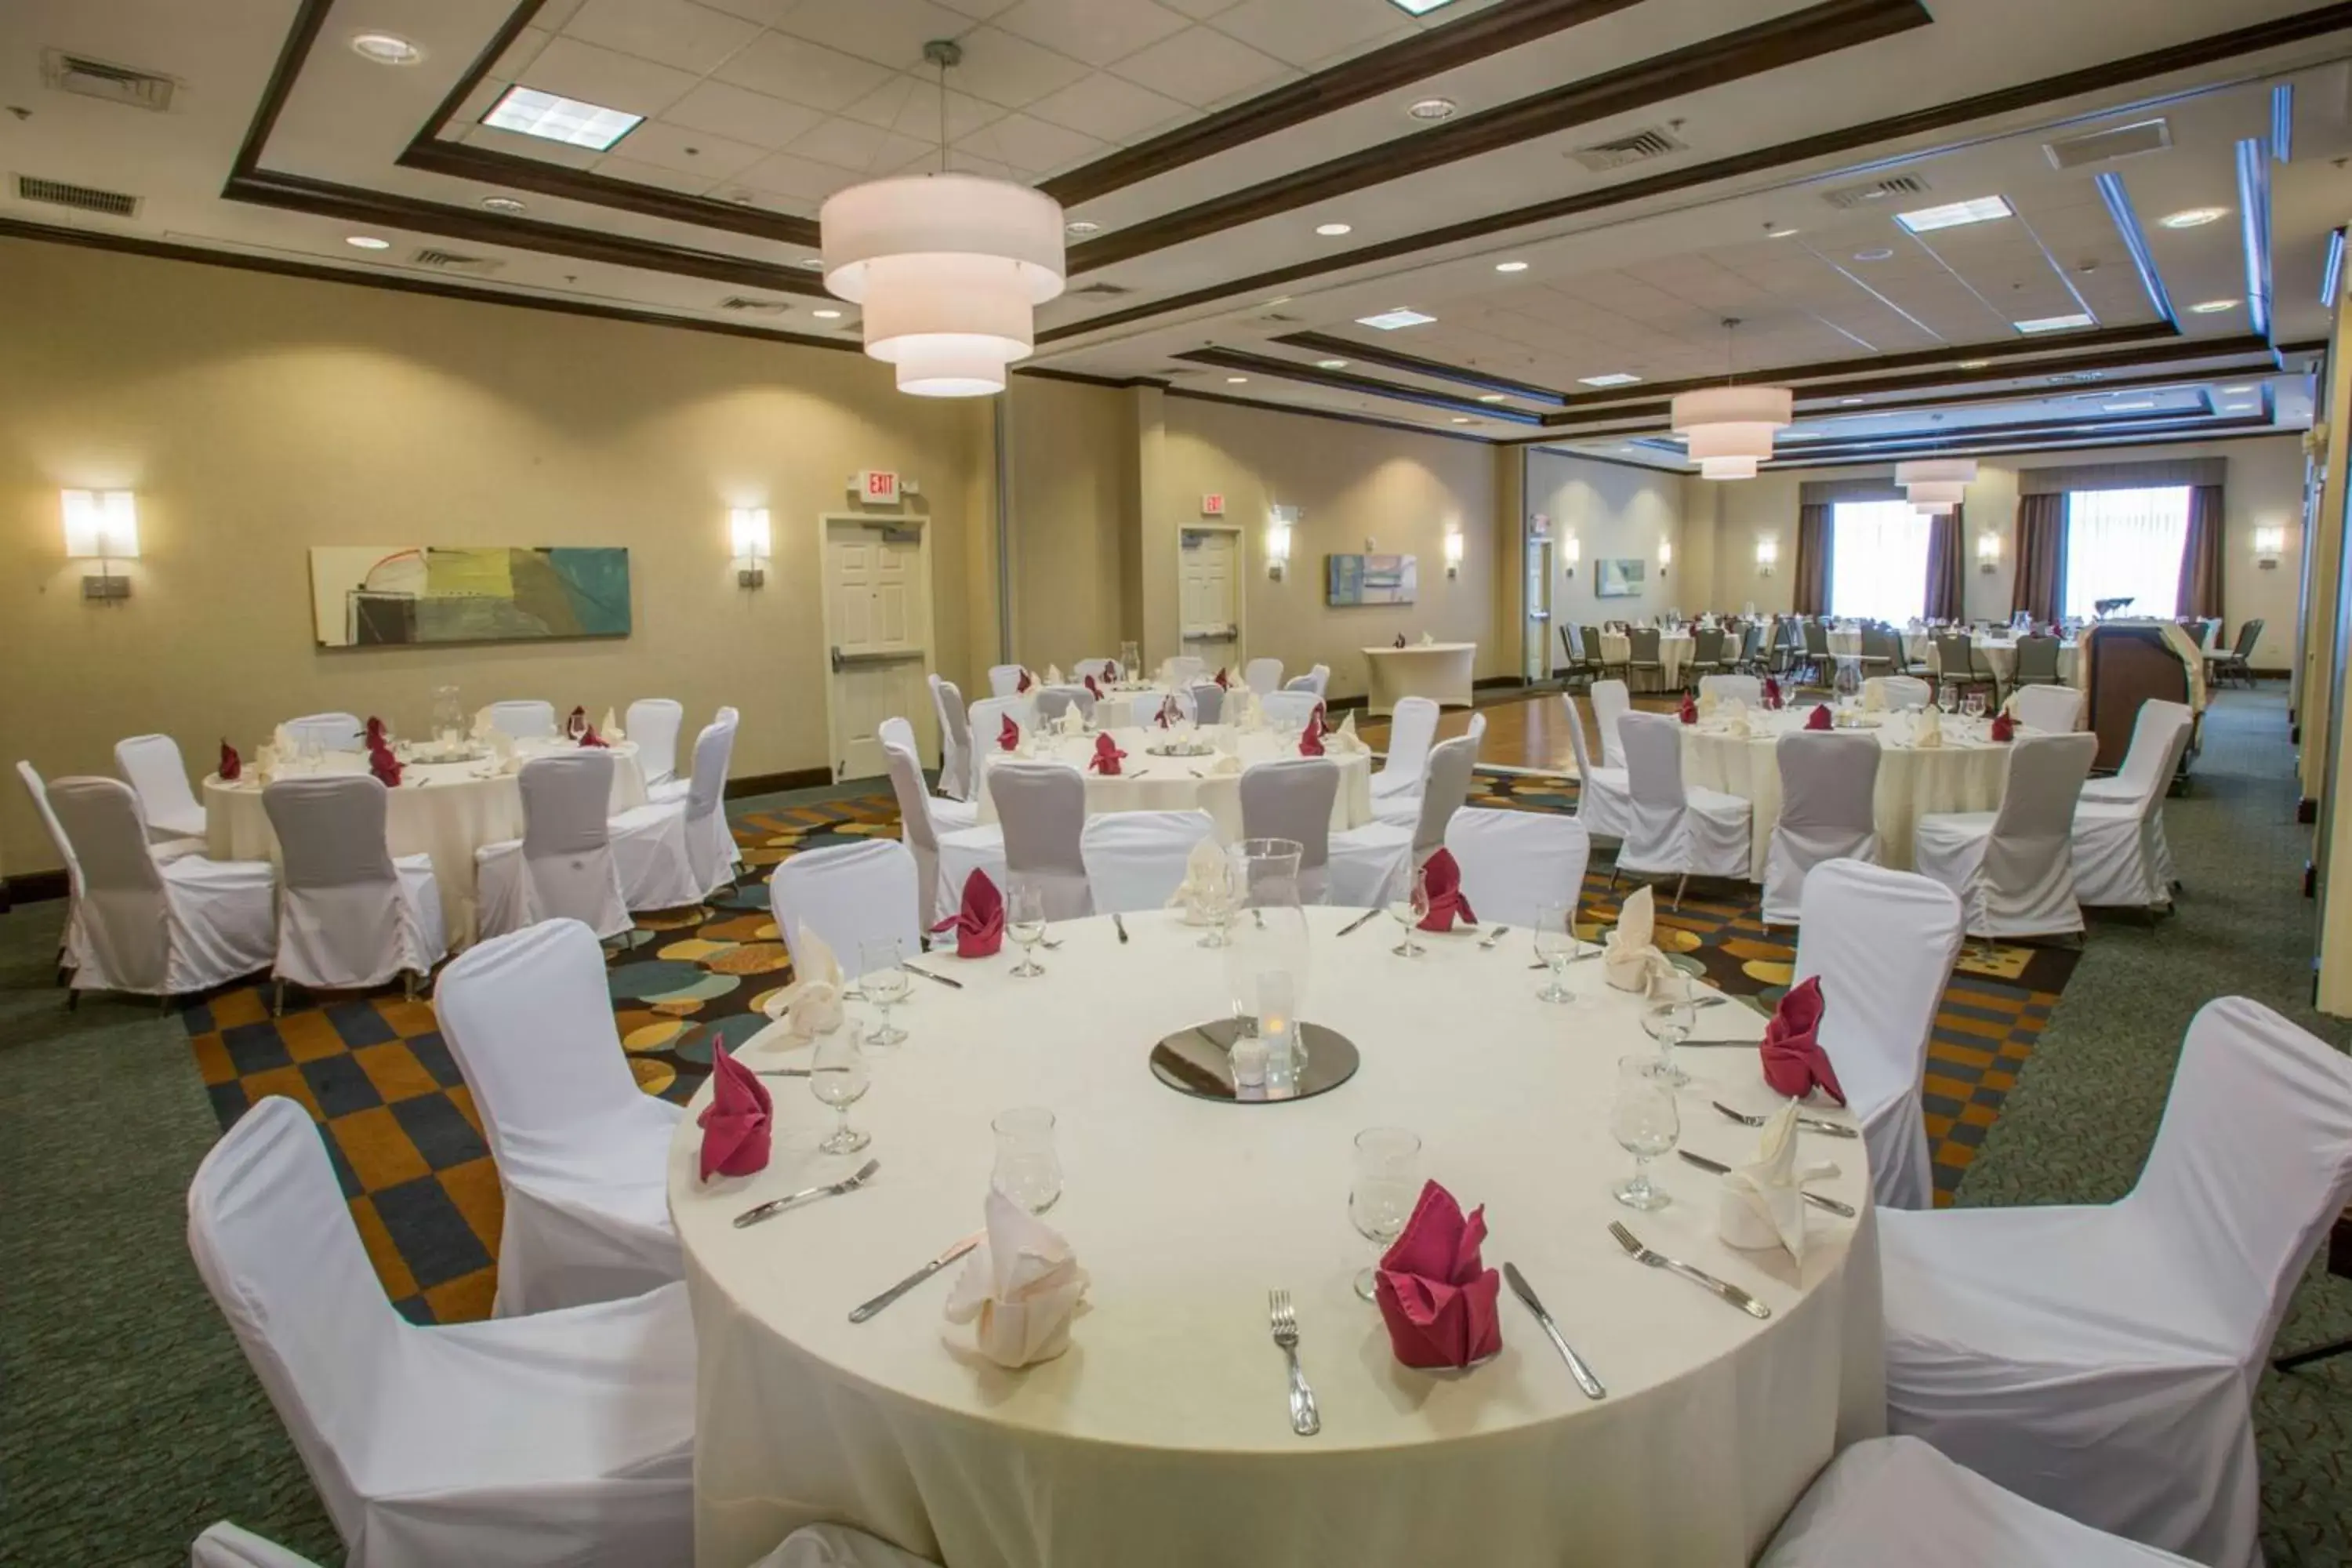 Meeting/conference room, Banquet Facilities in Hilton Garden Inn Dulles North